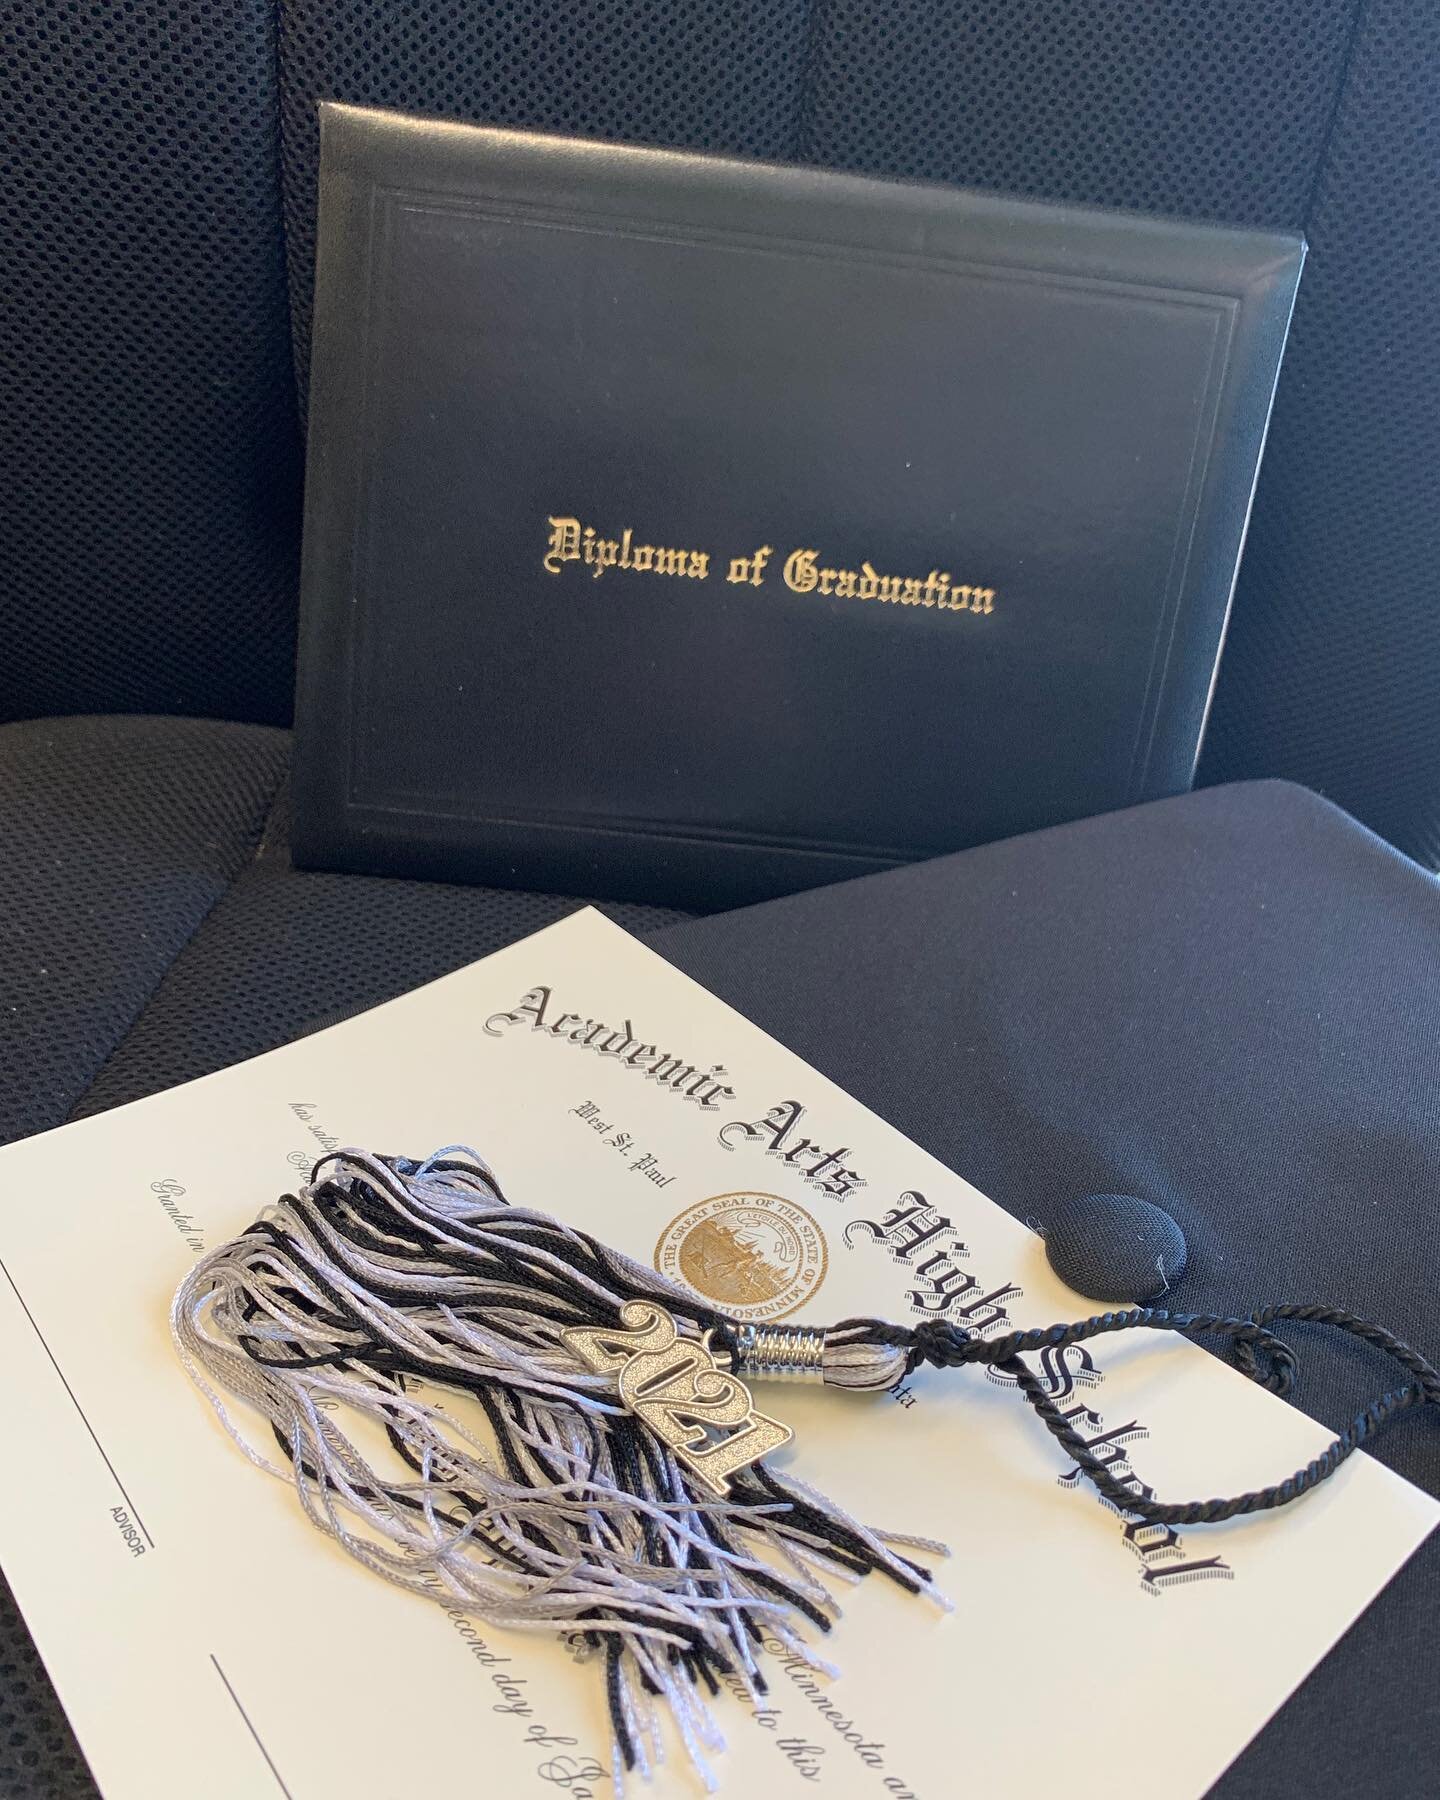 Hello AAHS Families! 

We wanted to quickly update you on our plans for the graduating Class of 2021 and our graduation ceremony on June 10, 2021. 

At this time, Academic Arts plans to offer an in-person, socially distanced graduation ceremony for o